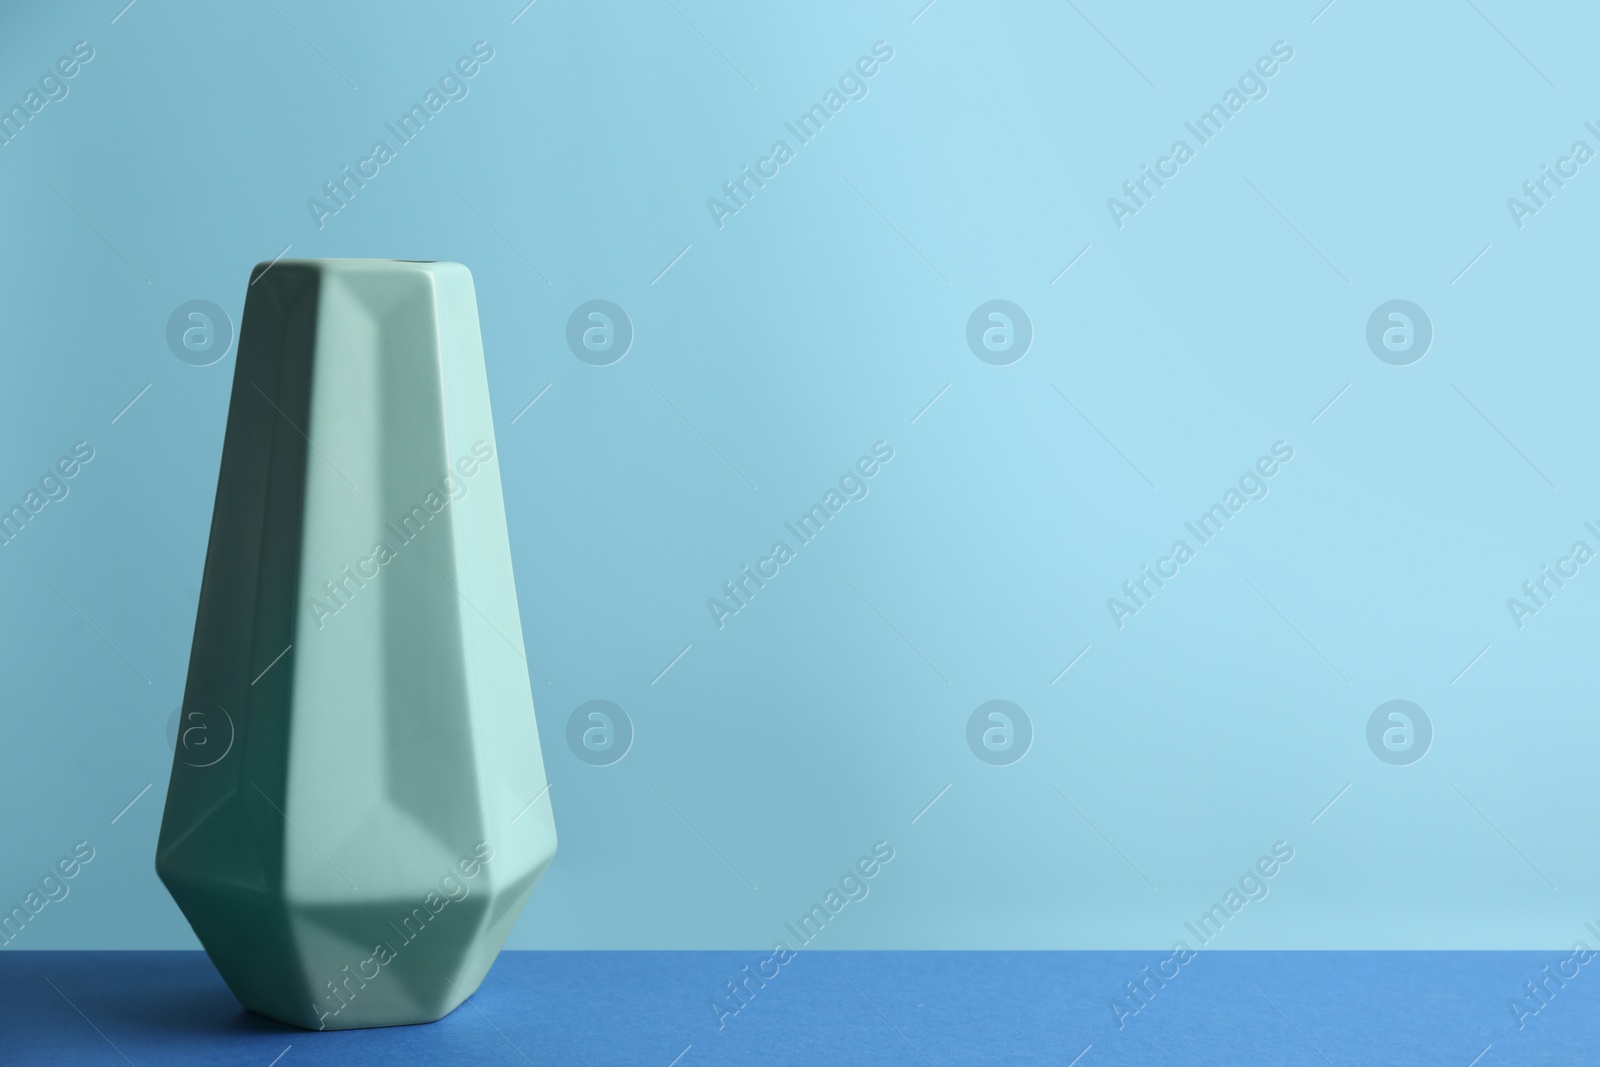 Photo of Stylish green ceramic vase on table against light blue background, space for text